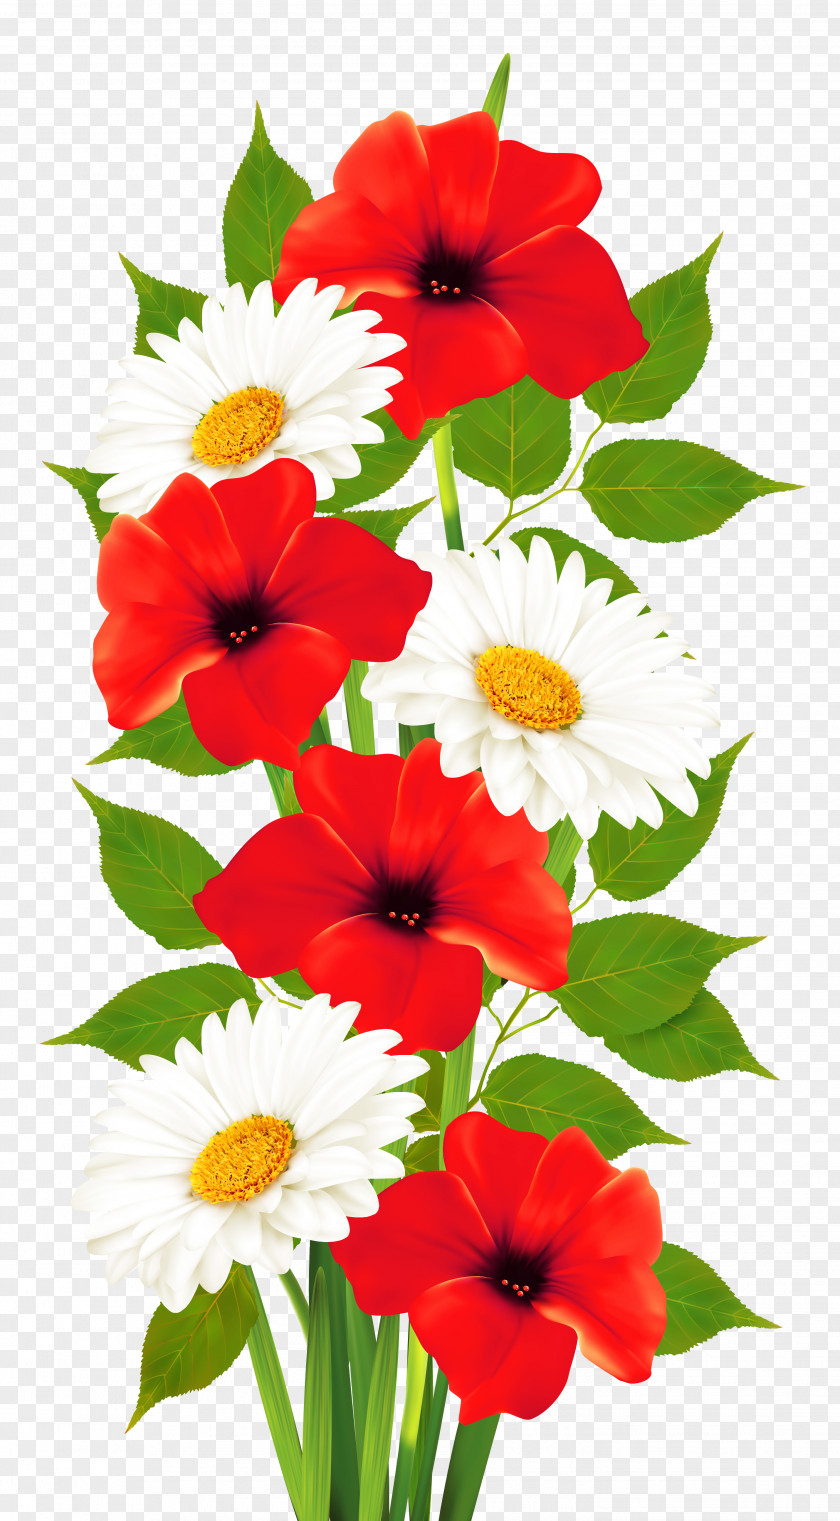 Poppies And Daisies Transparent Clipart Flower Clip Art PNG